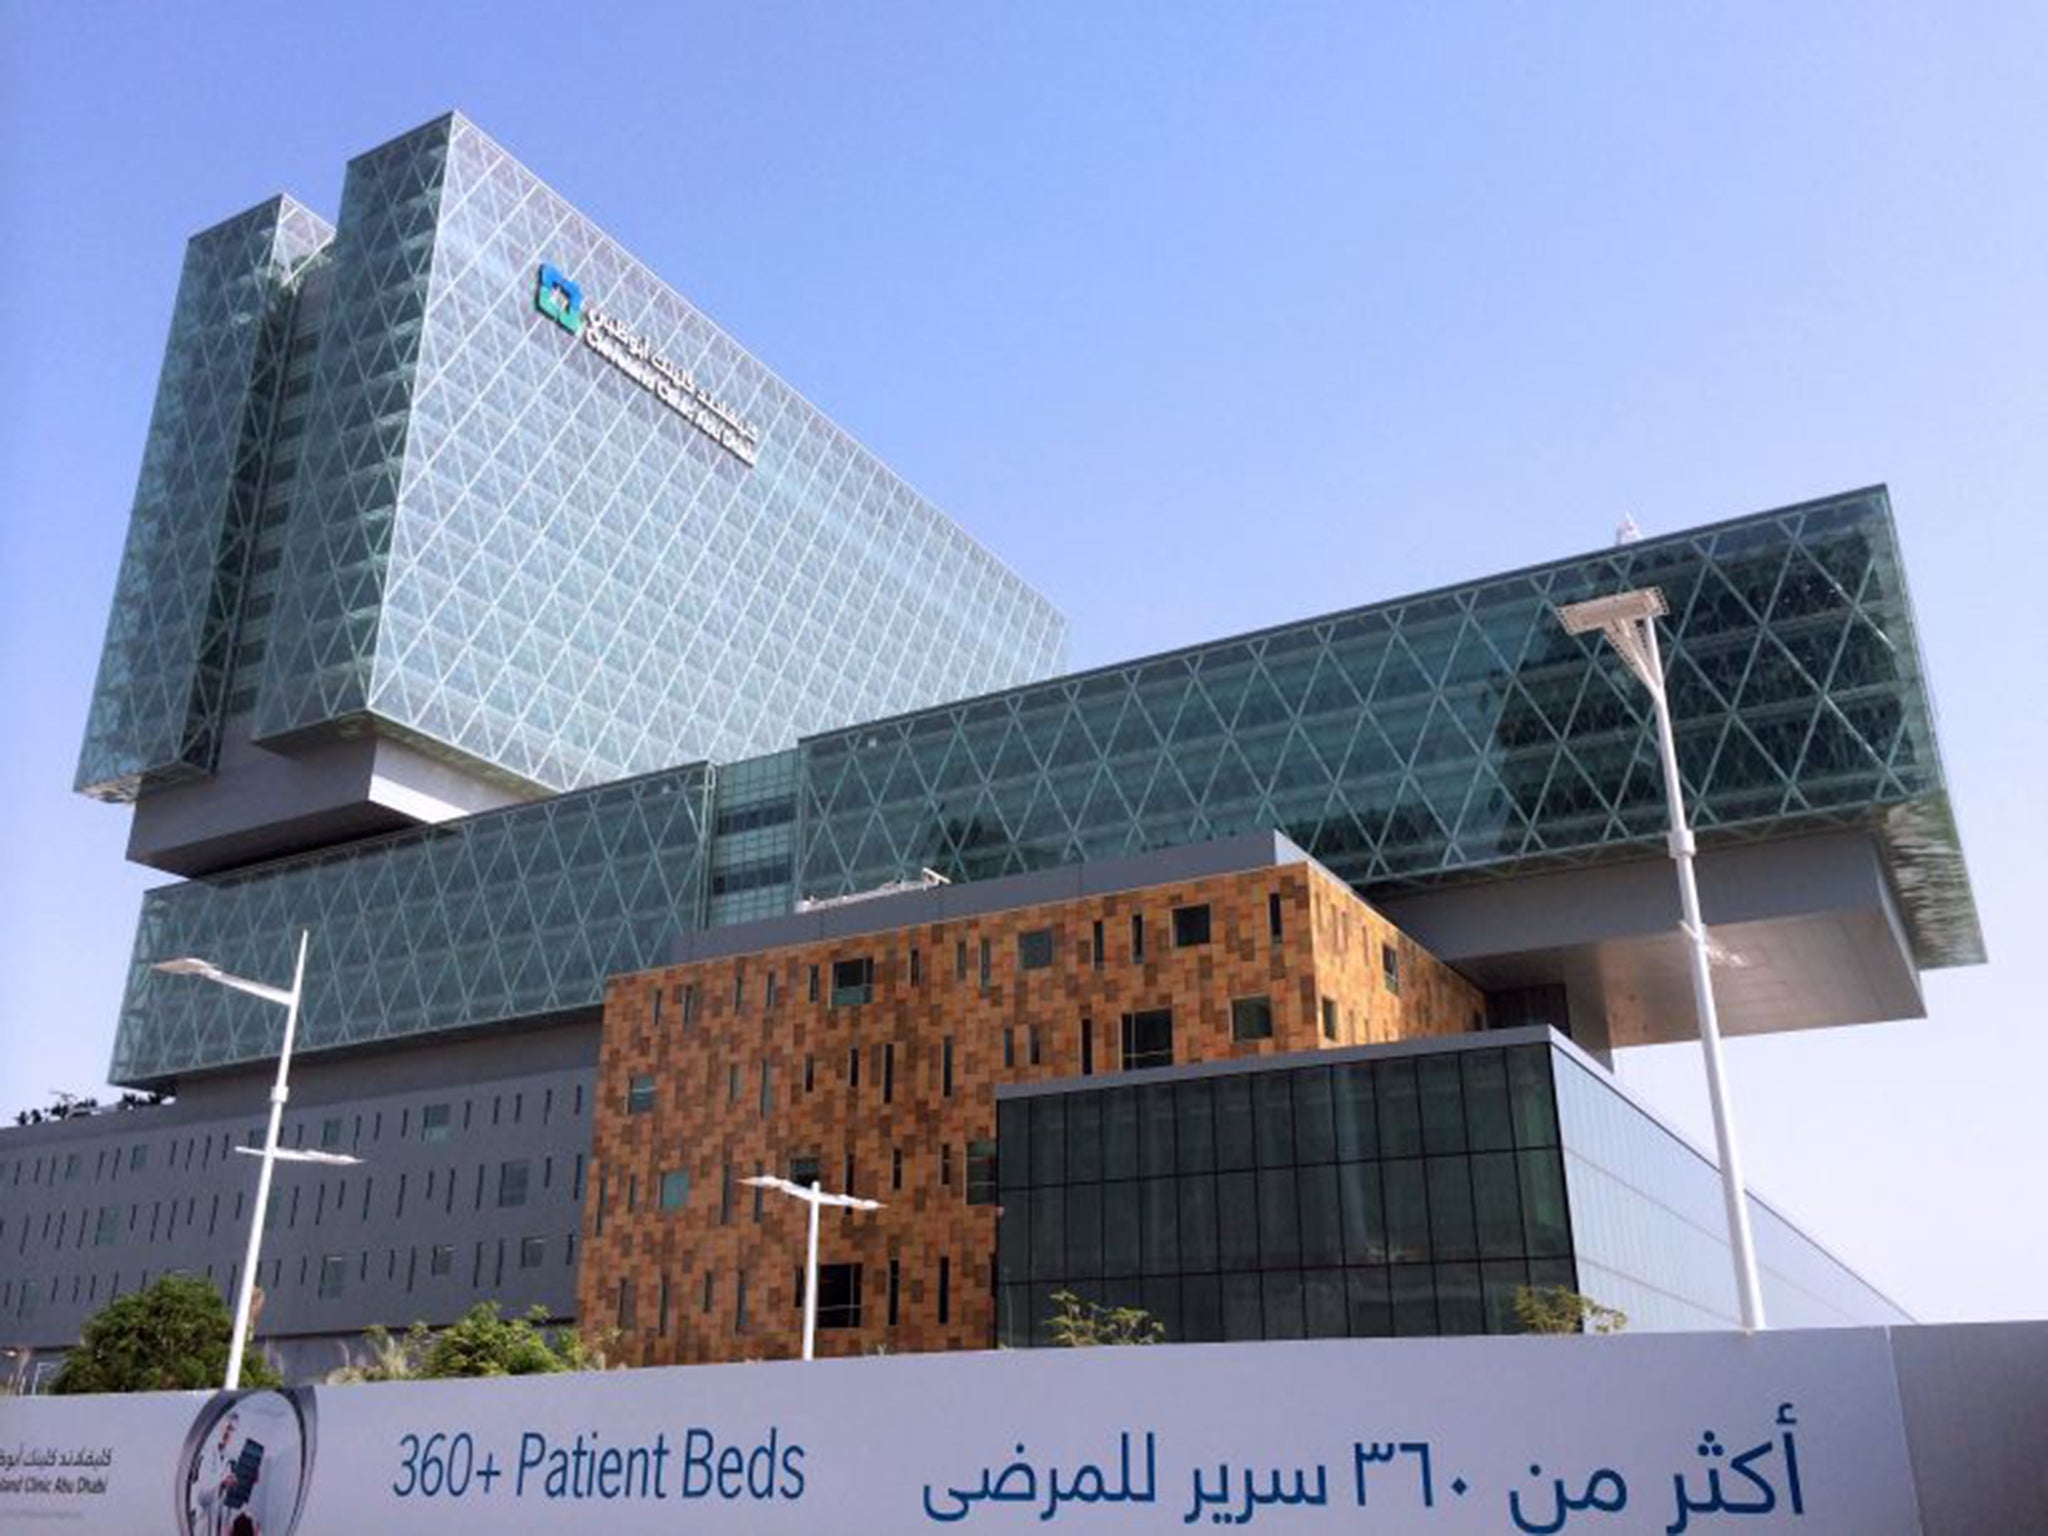 The Cleveland Clinic’s new 22-storey hospital in Abu Dhabi is to open within two weeks